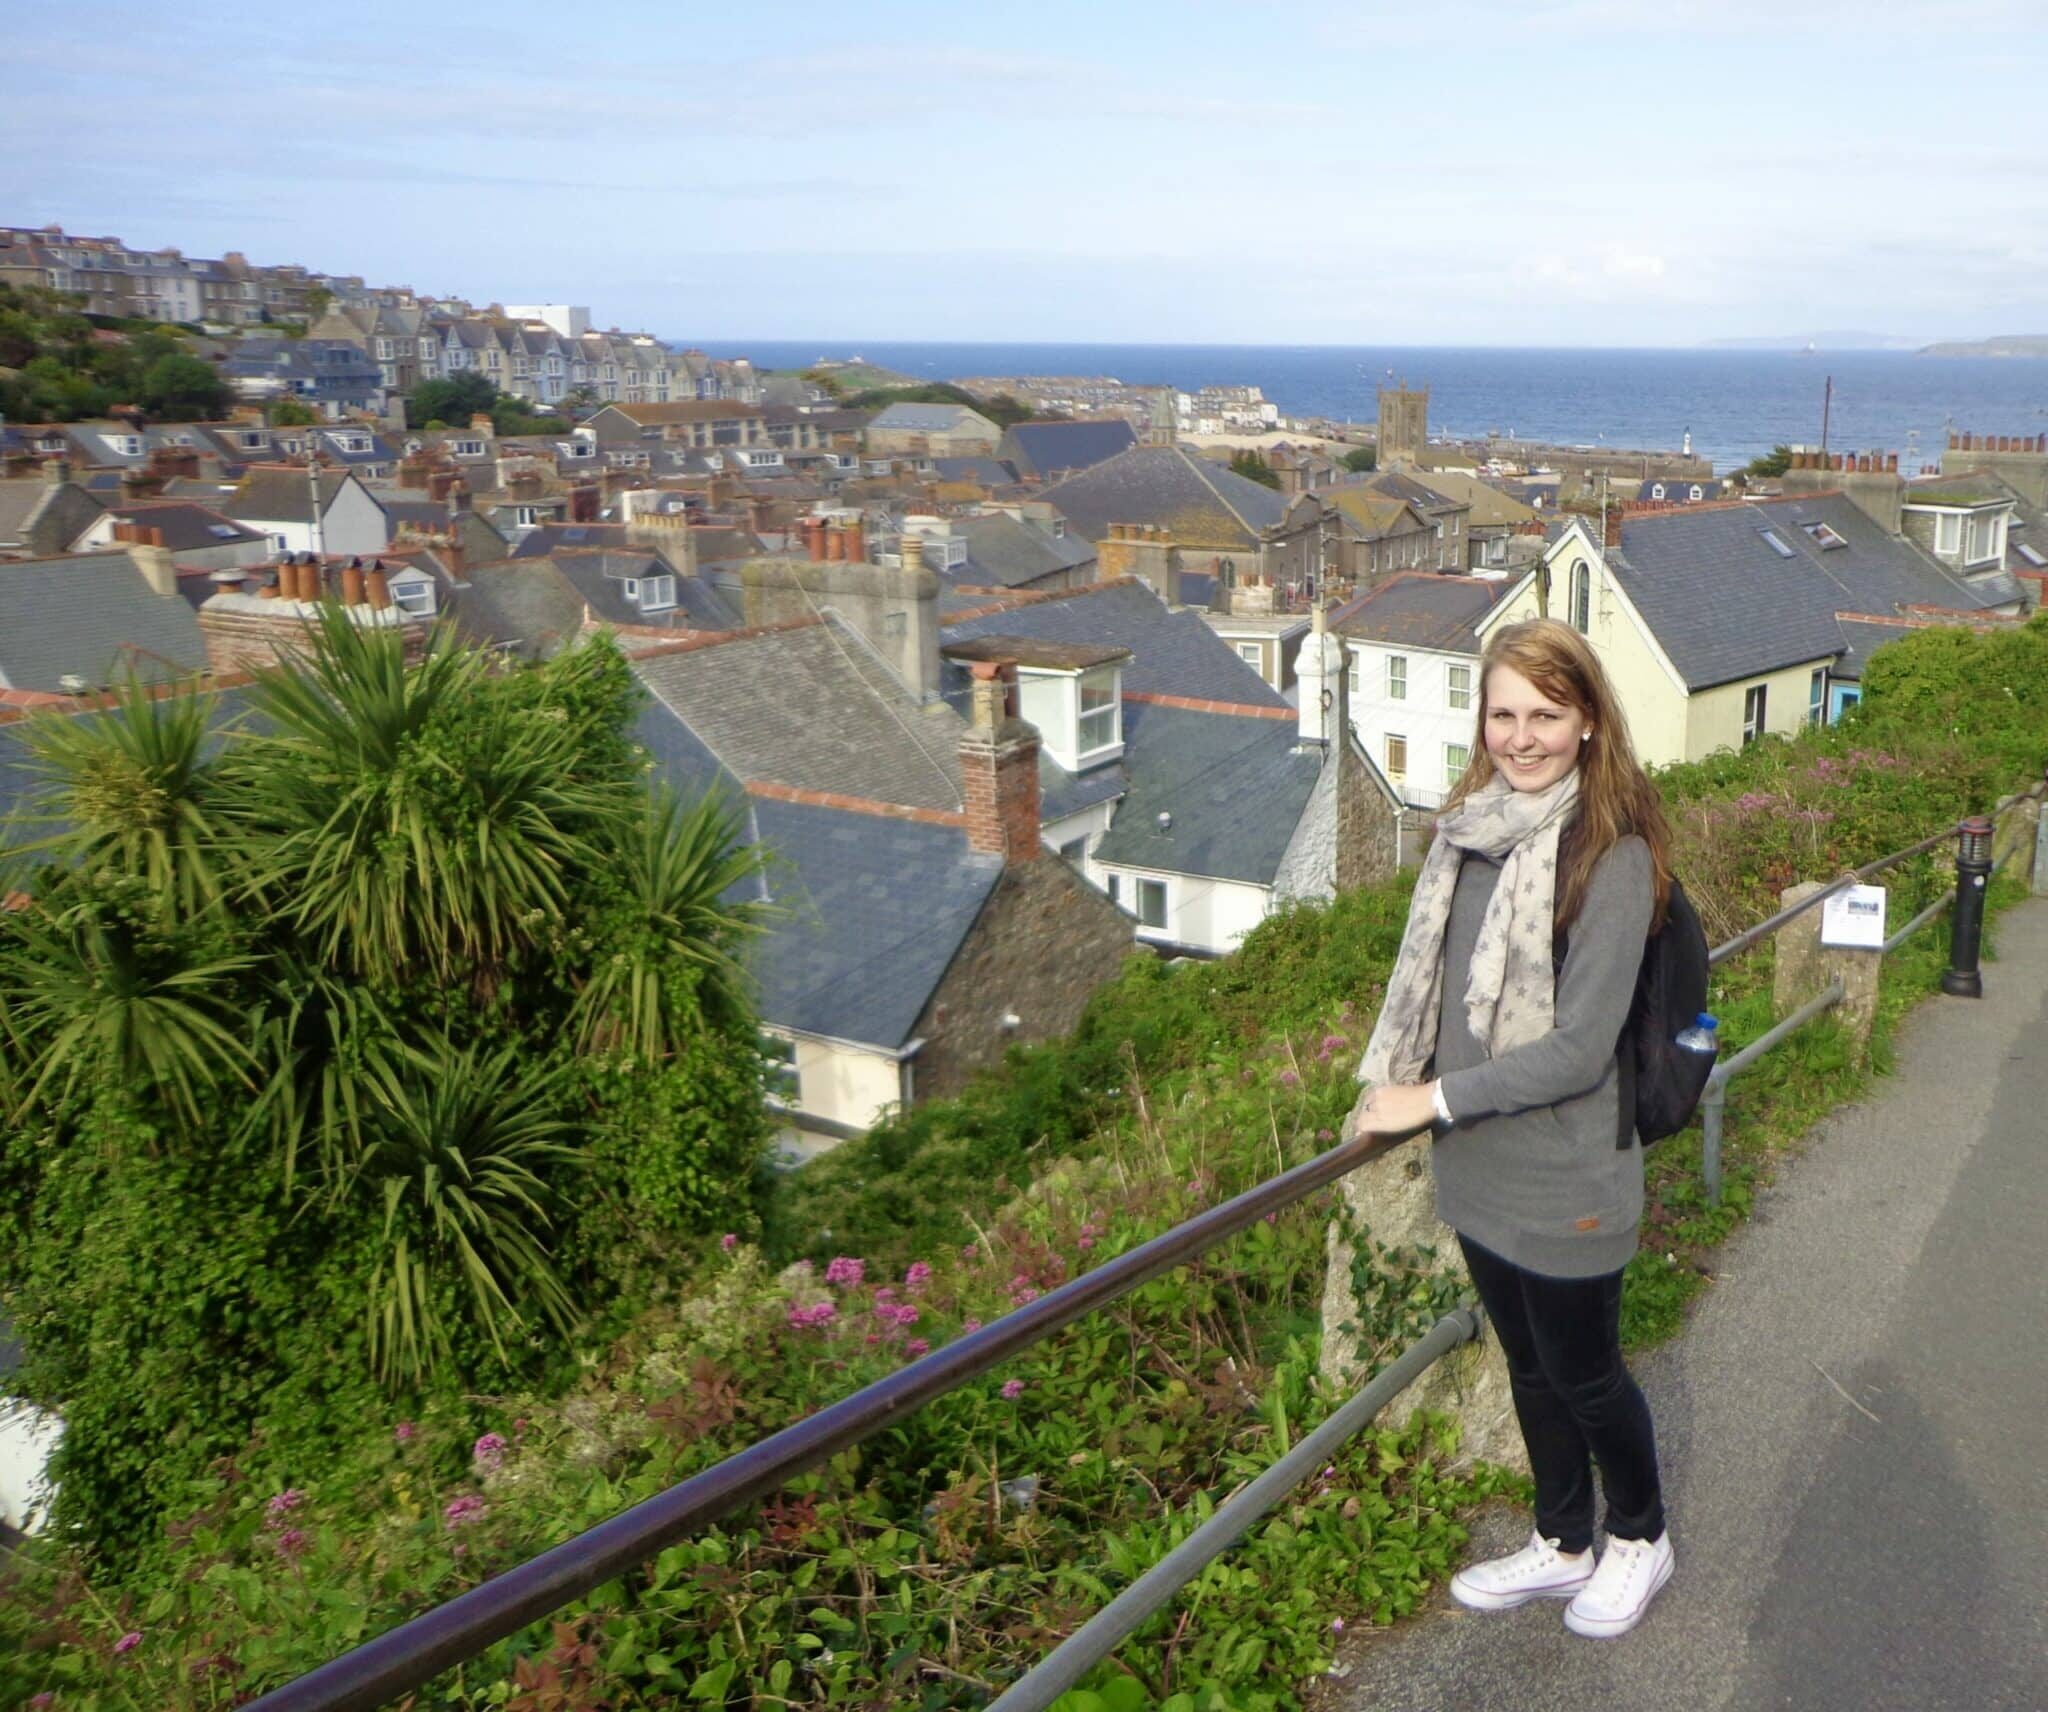 Day trip: Steep coasts at the end of England